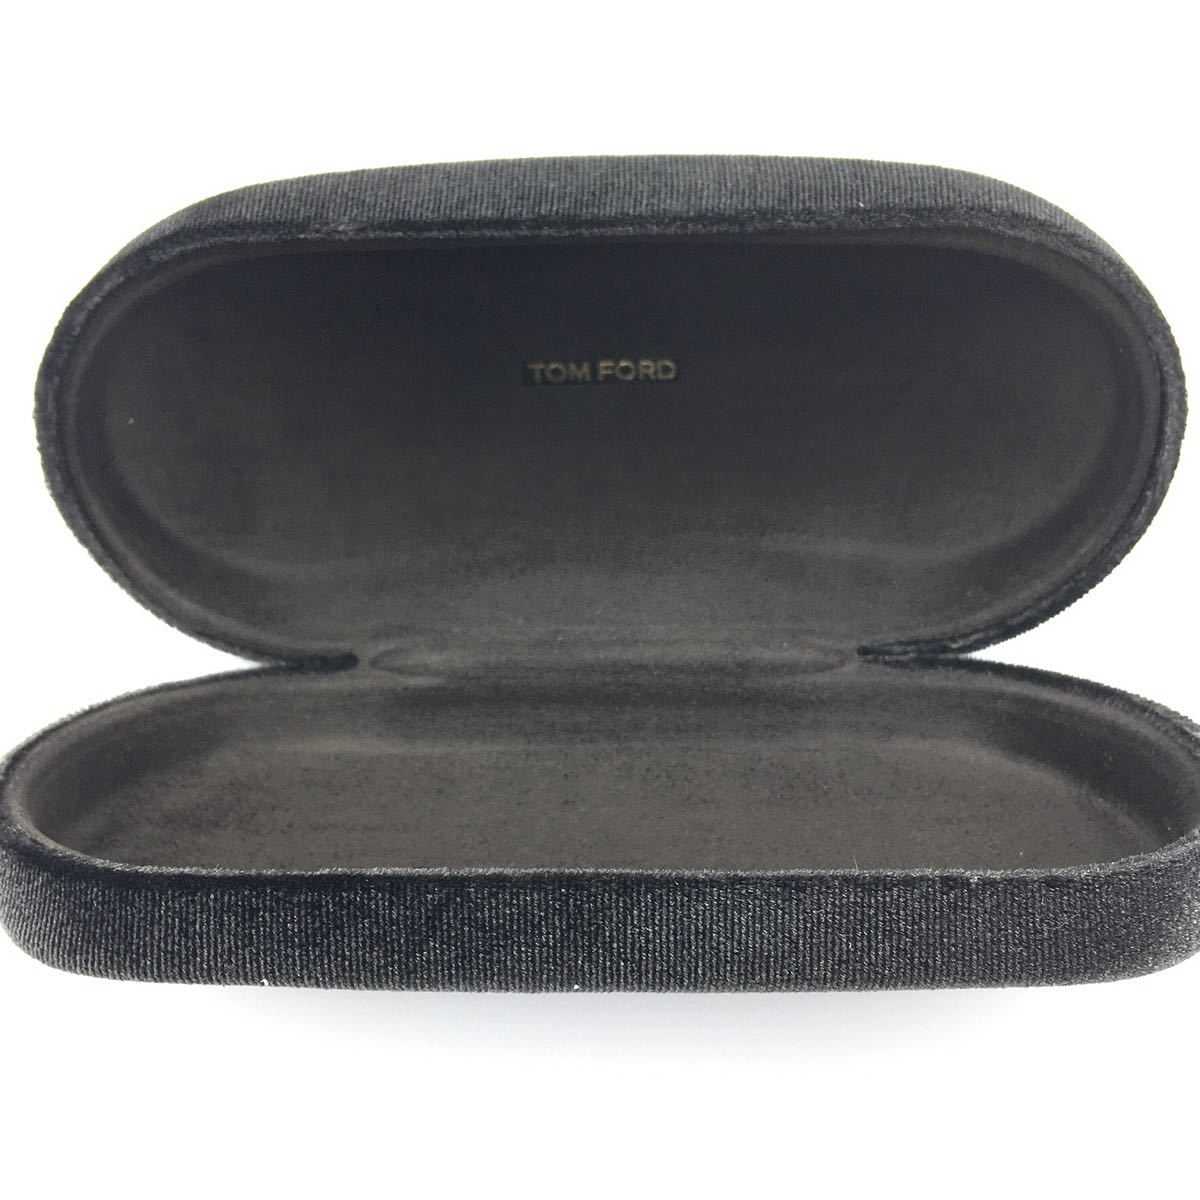 TOMFORD Tom Ford sunglasses case new goods unused large type black glasses case case only 